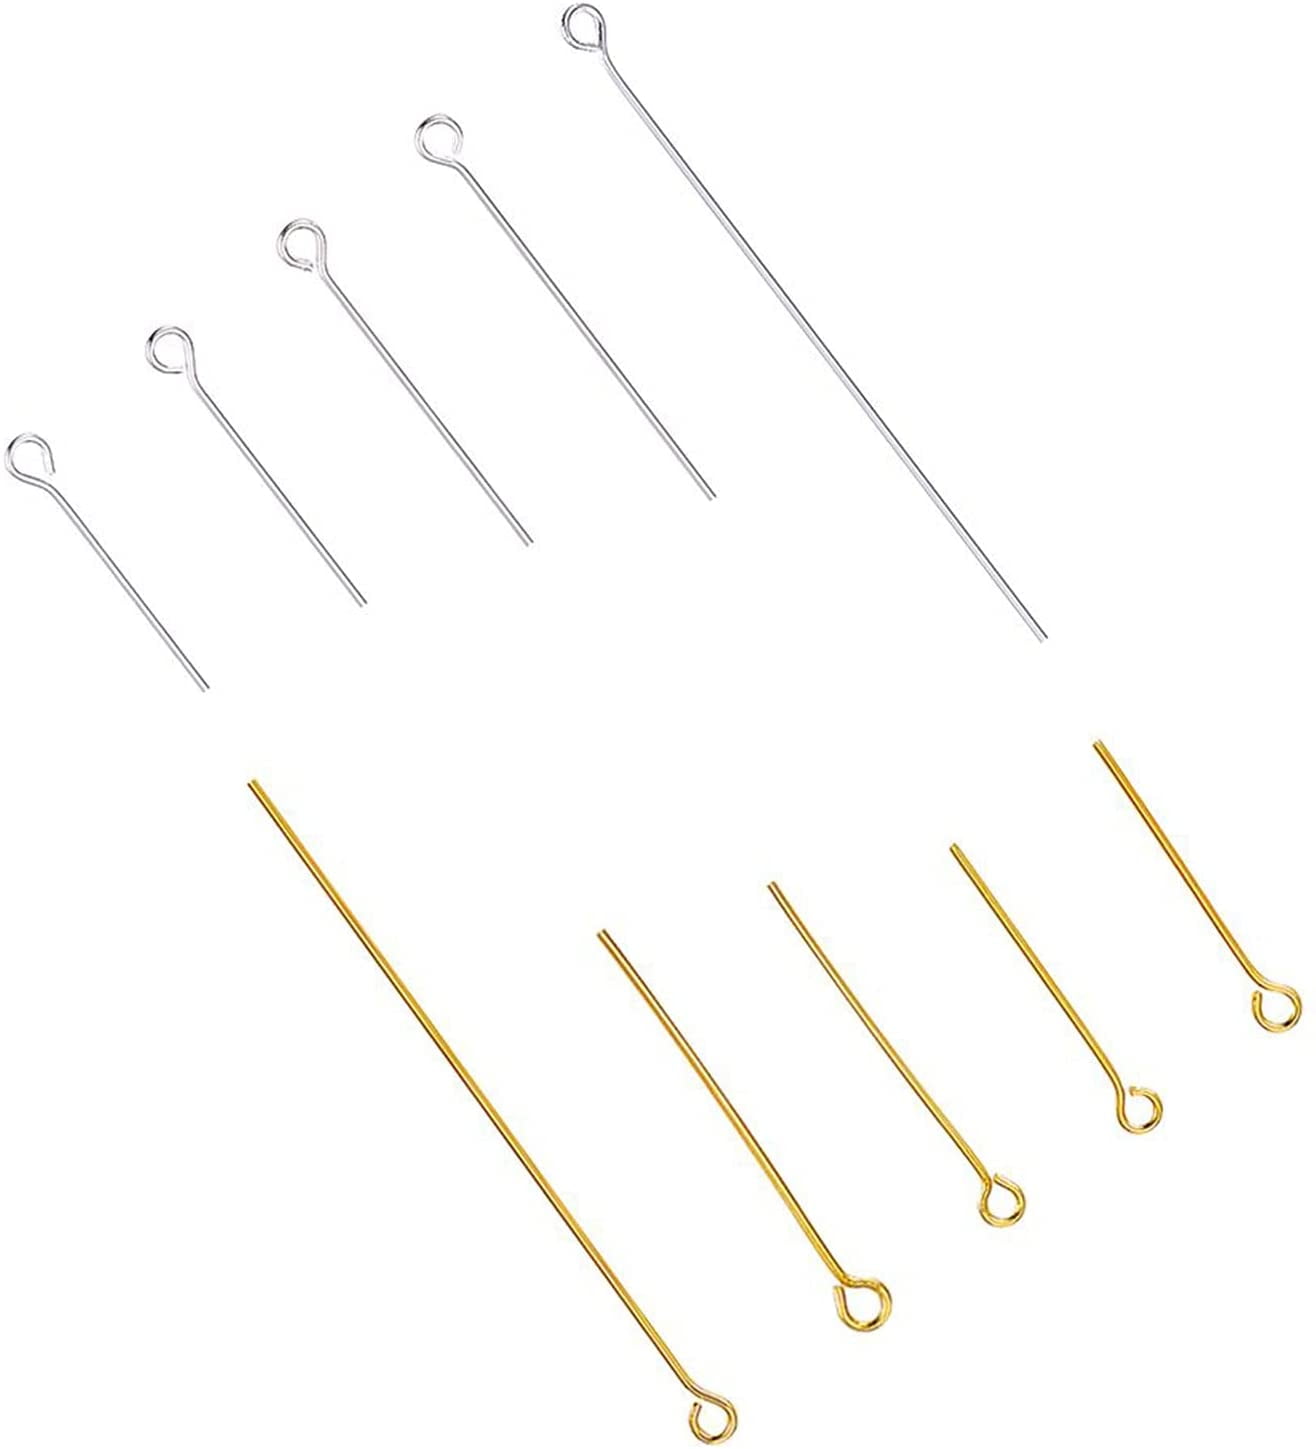 Wholesale Silver/Gold Plated Ball Pins Beading Needles Jewelry Findings 8 Sizes 